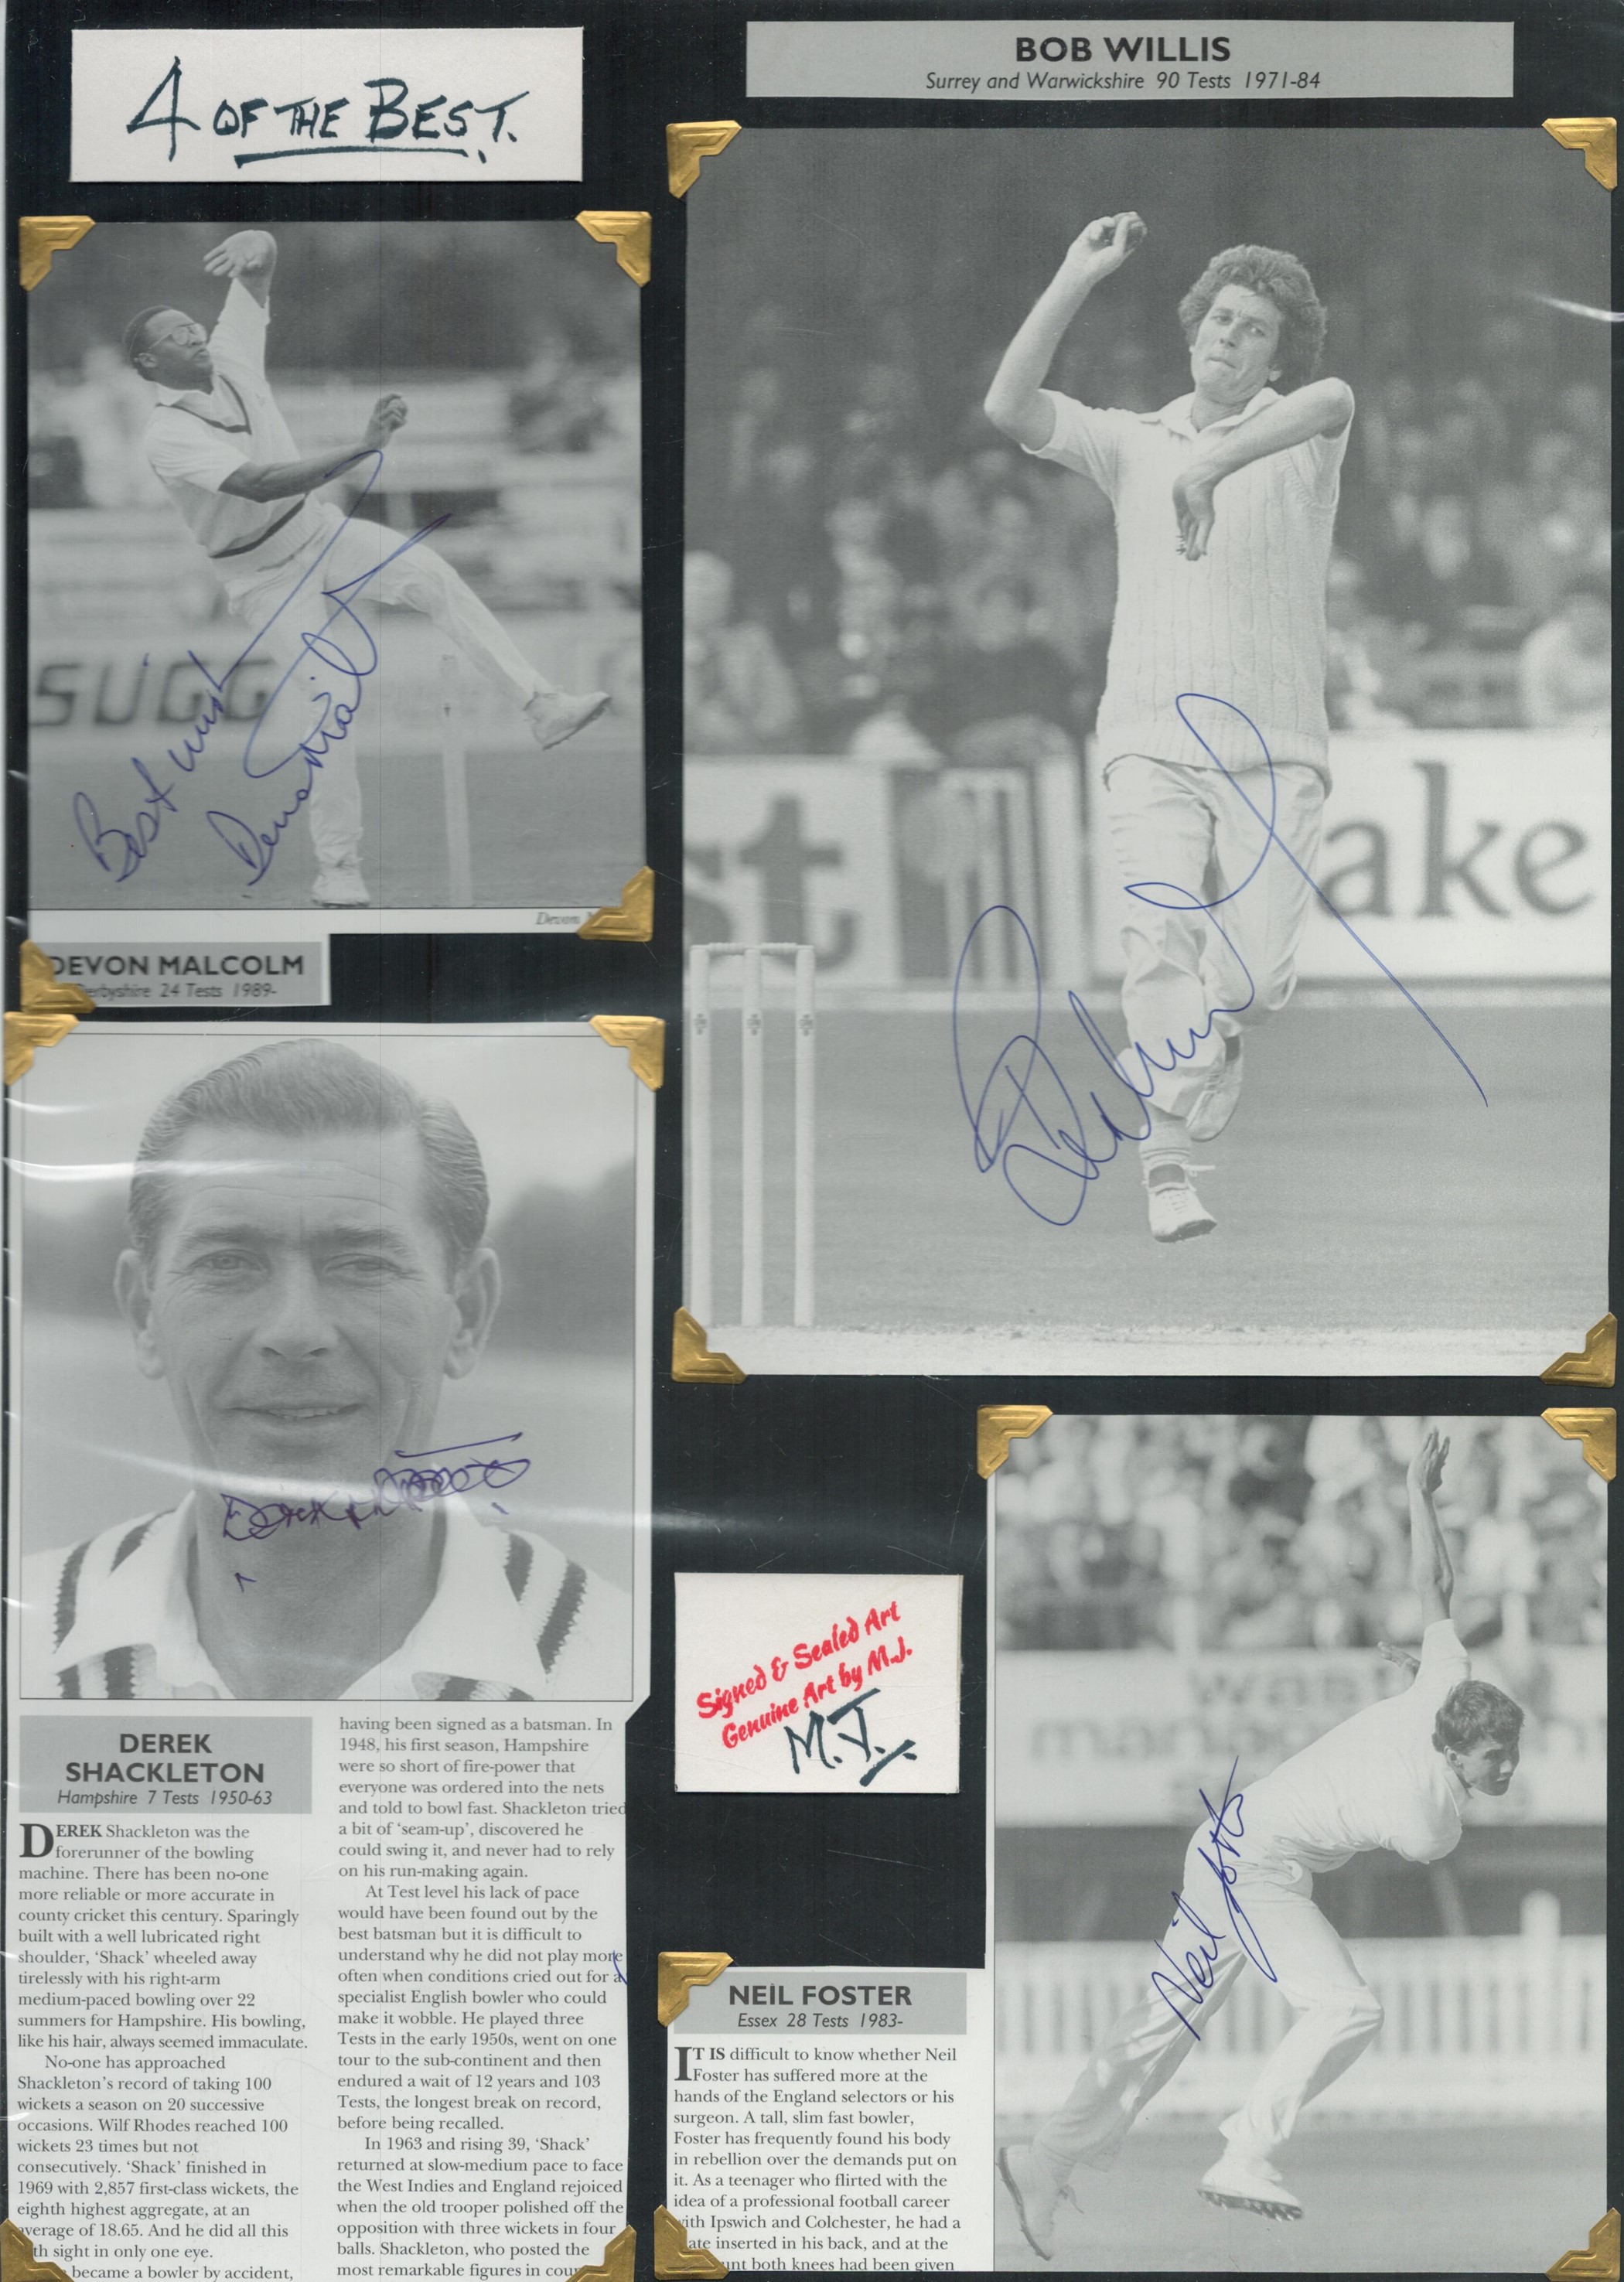 Cricket Legends 17x11 inch mounted signature piece 4 signed black and white photos from great